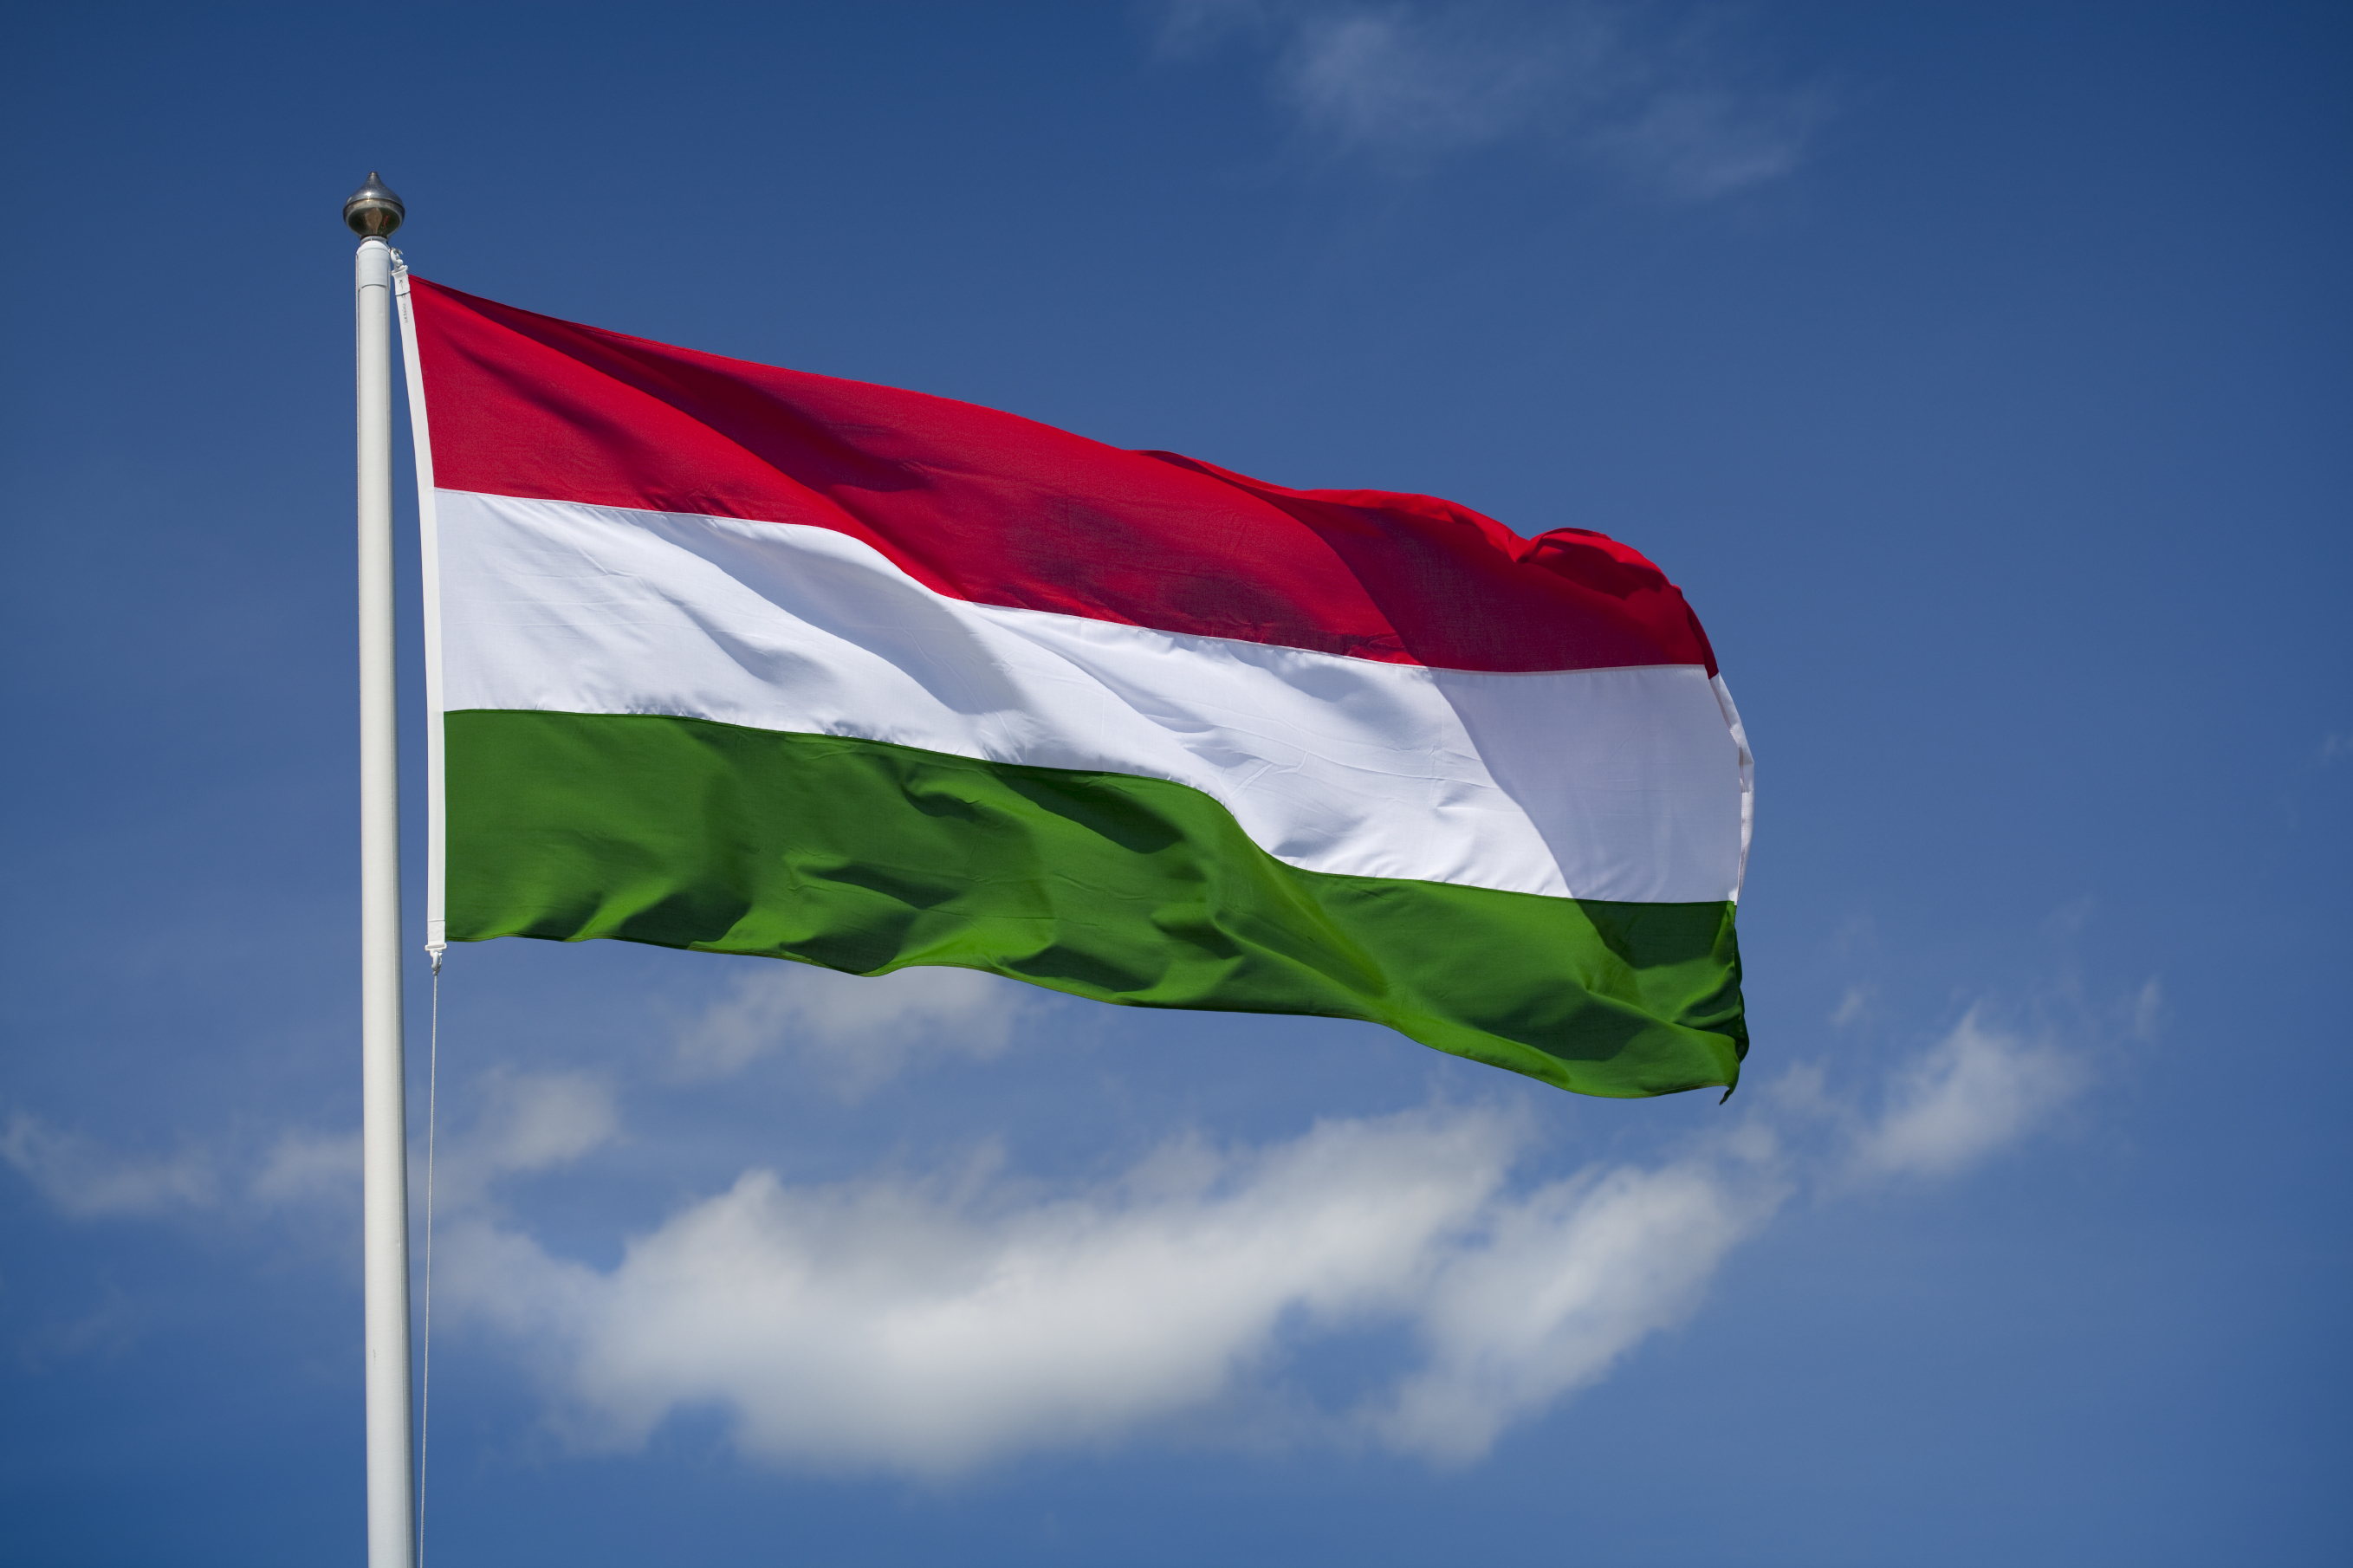 hungary-moves-to-boost-its-higher-education-standing-times-higher